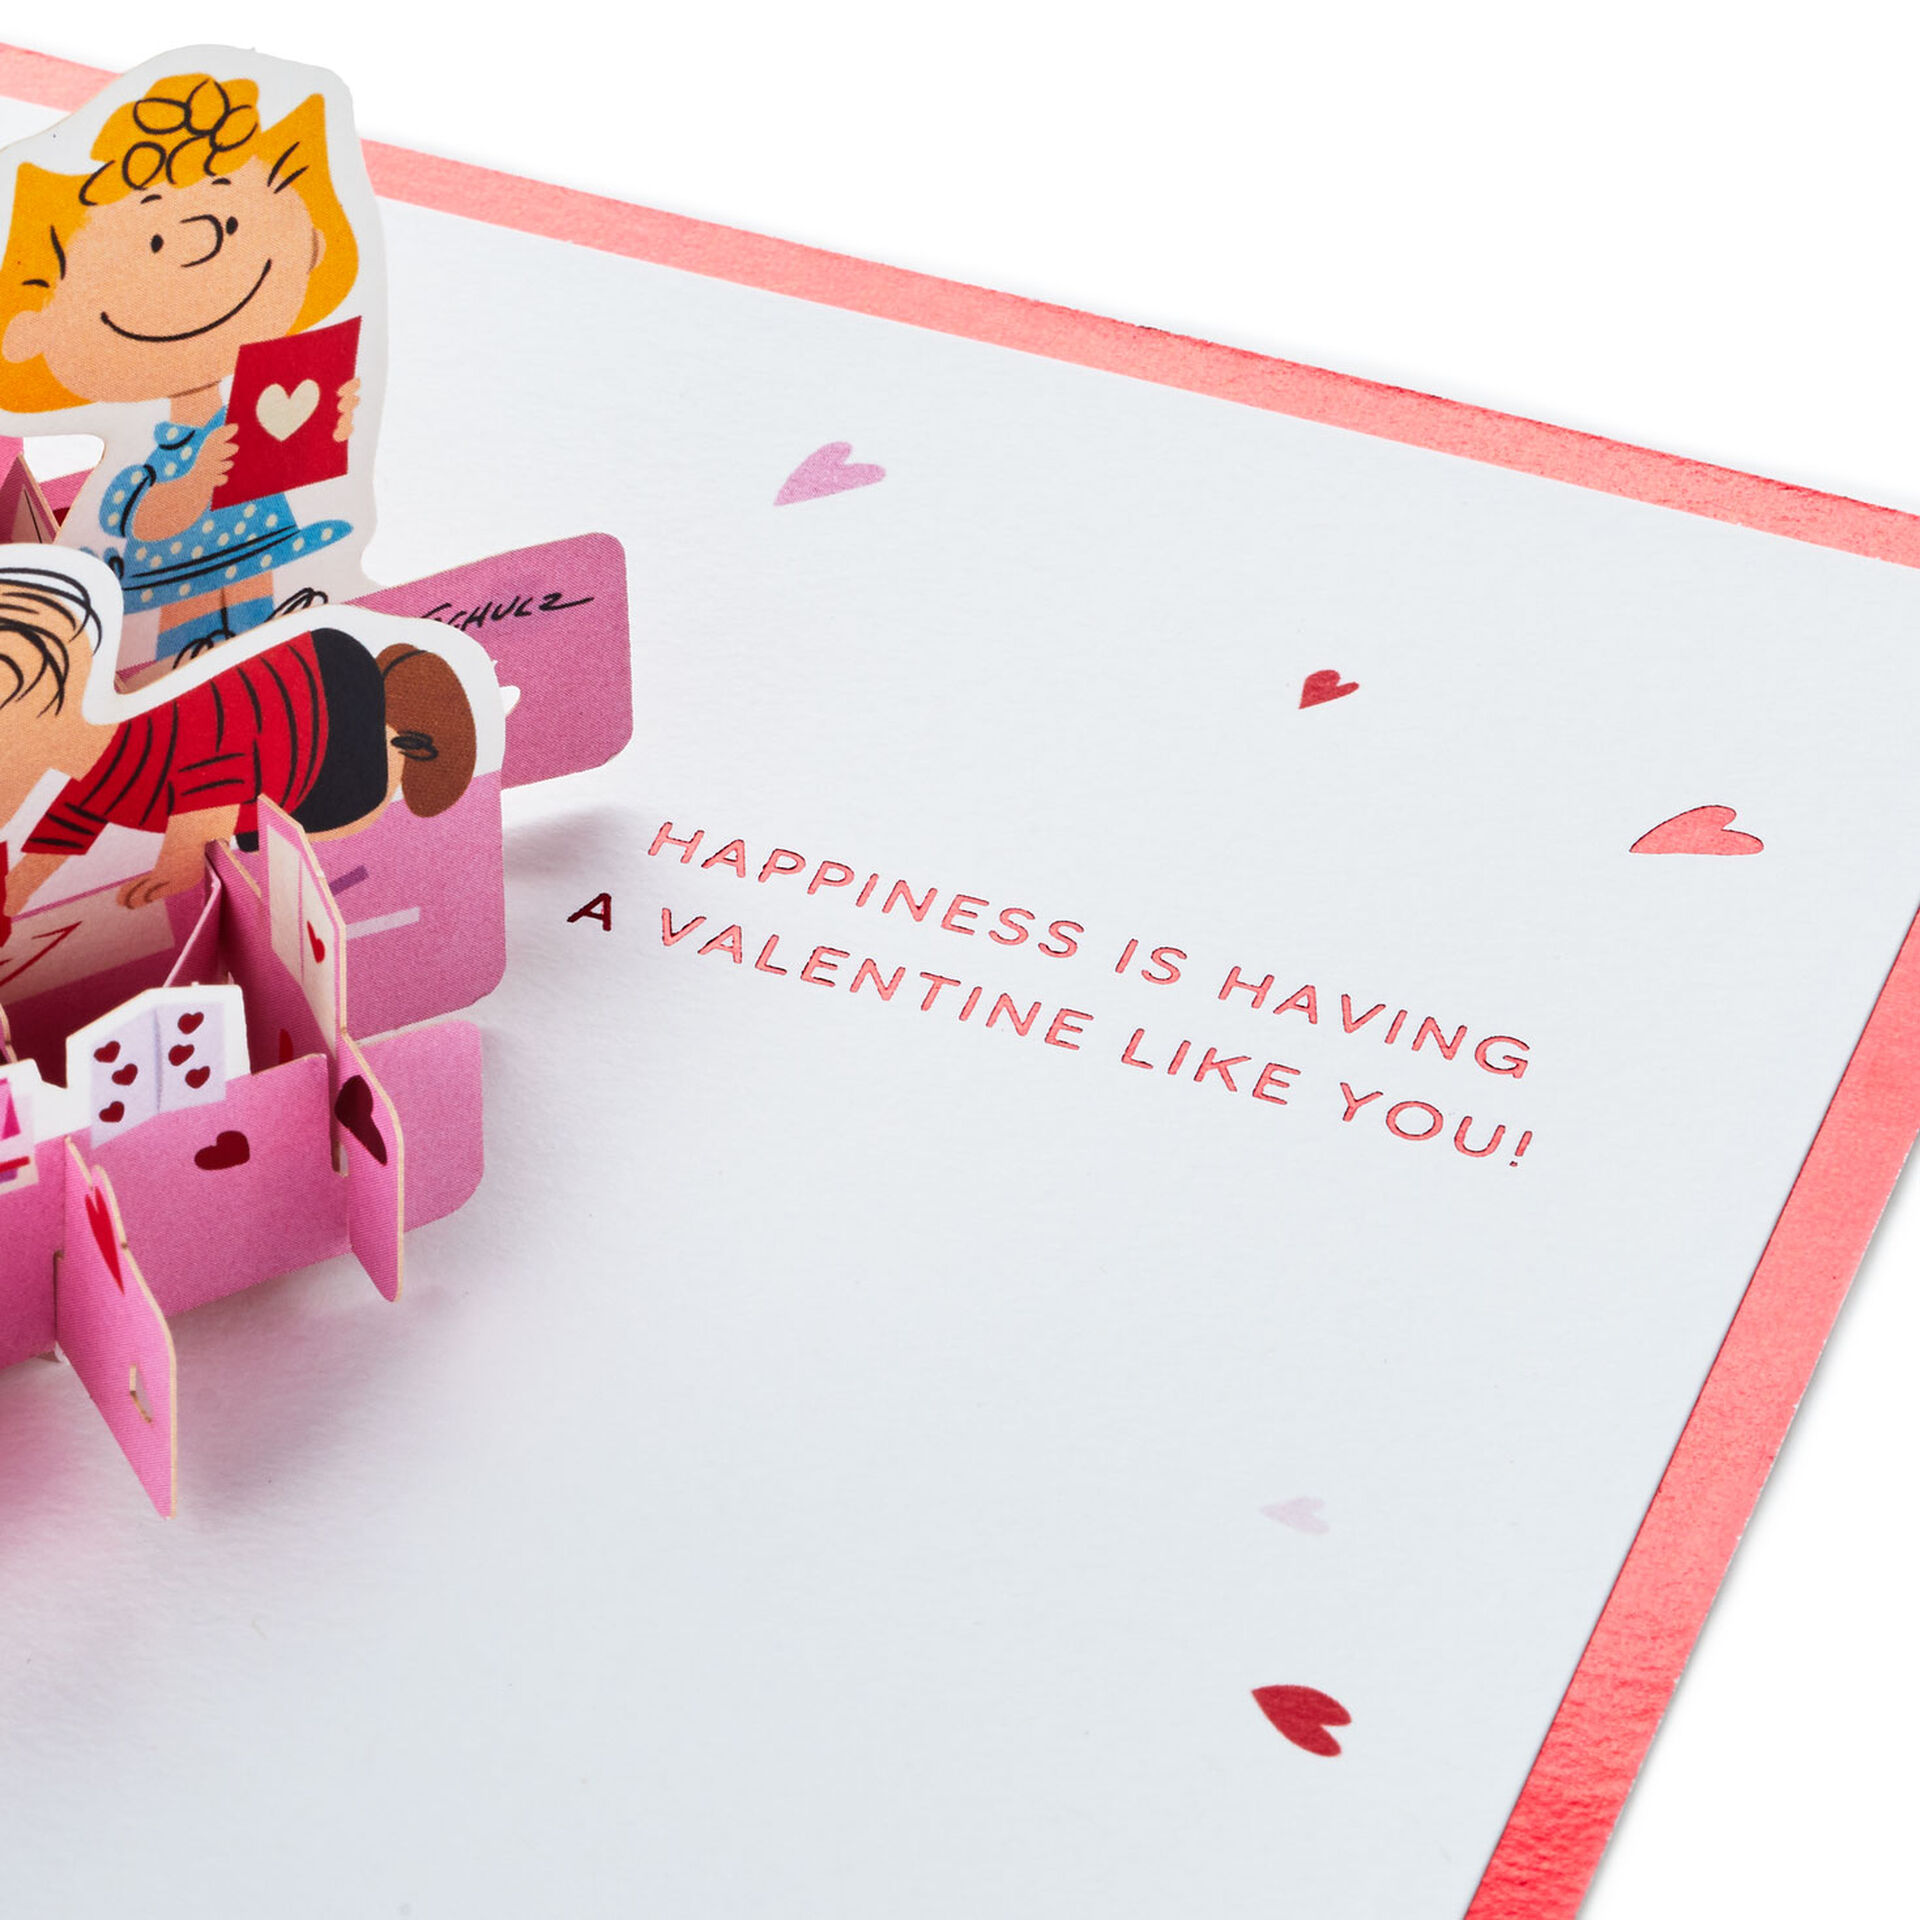 Snoopy-and-Peanuts-Gang-3D-PopUp-Valentines-Day-Card_1499IAV5072_06